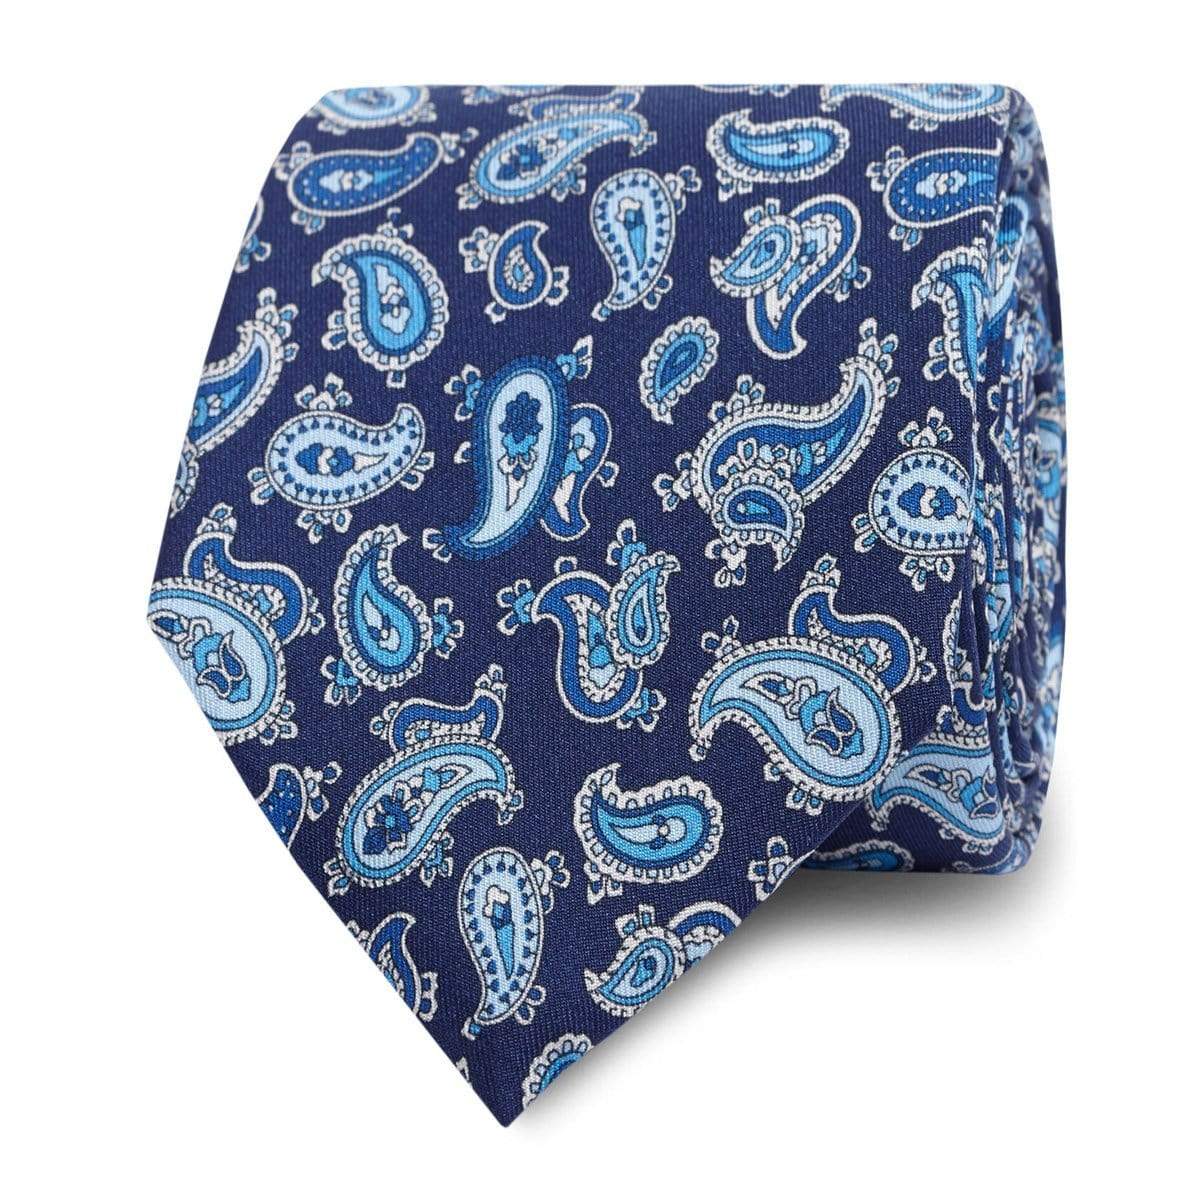 T.M.Lewin-Paisley-Print-Tie-Navy-and-Blue-69771-002